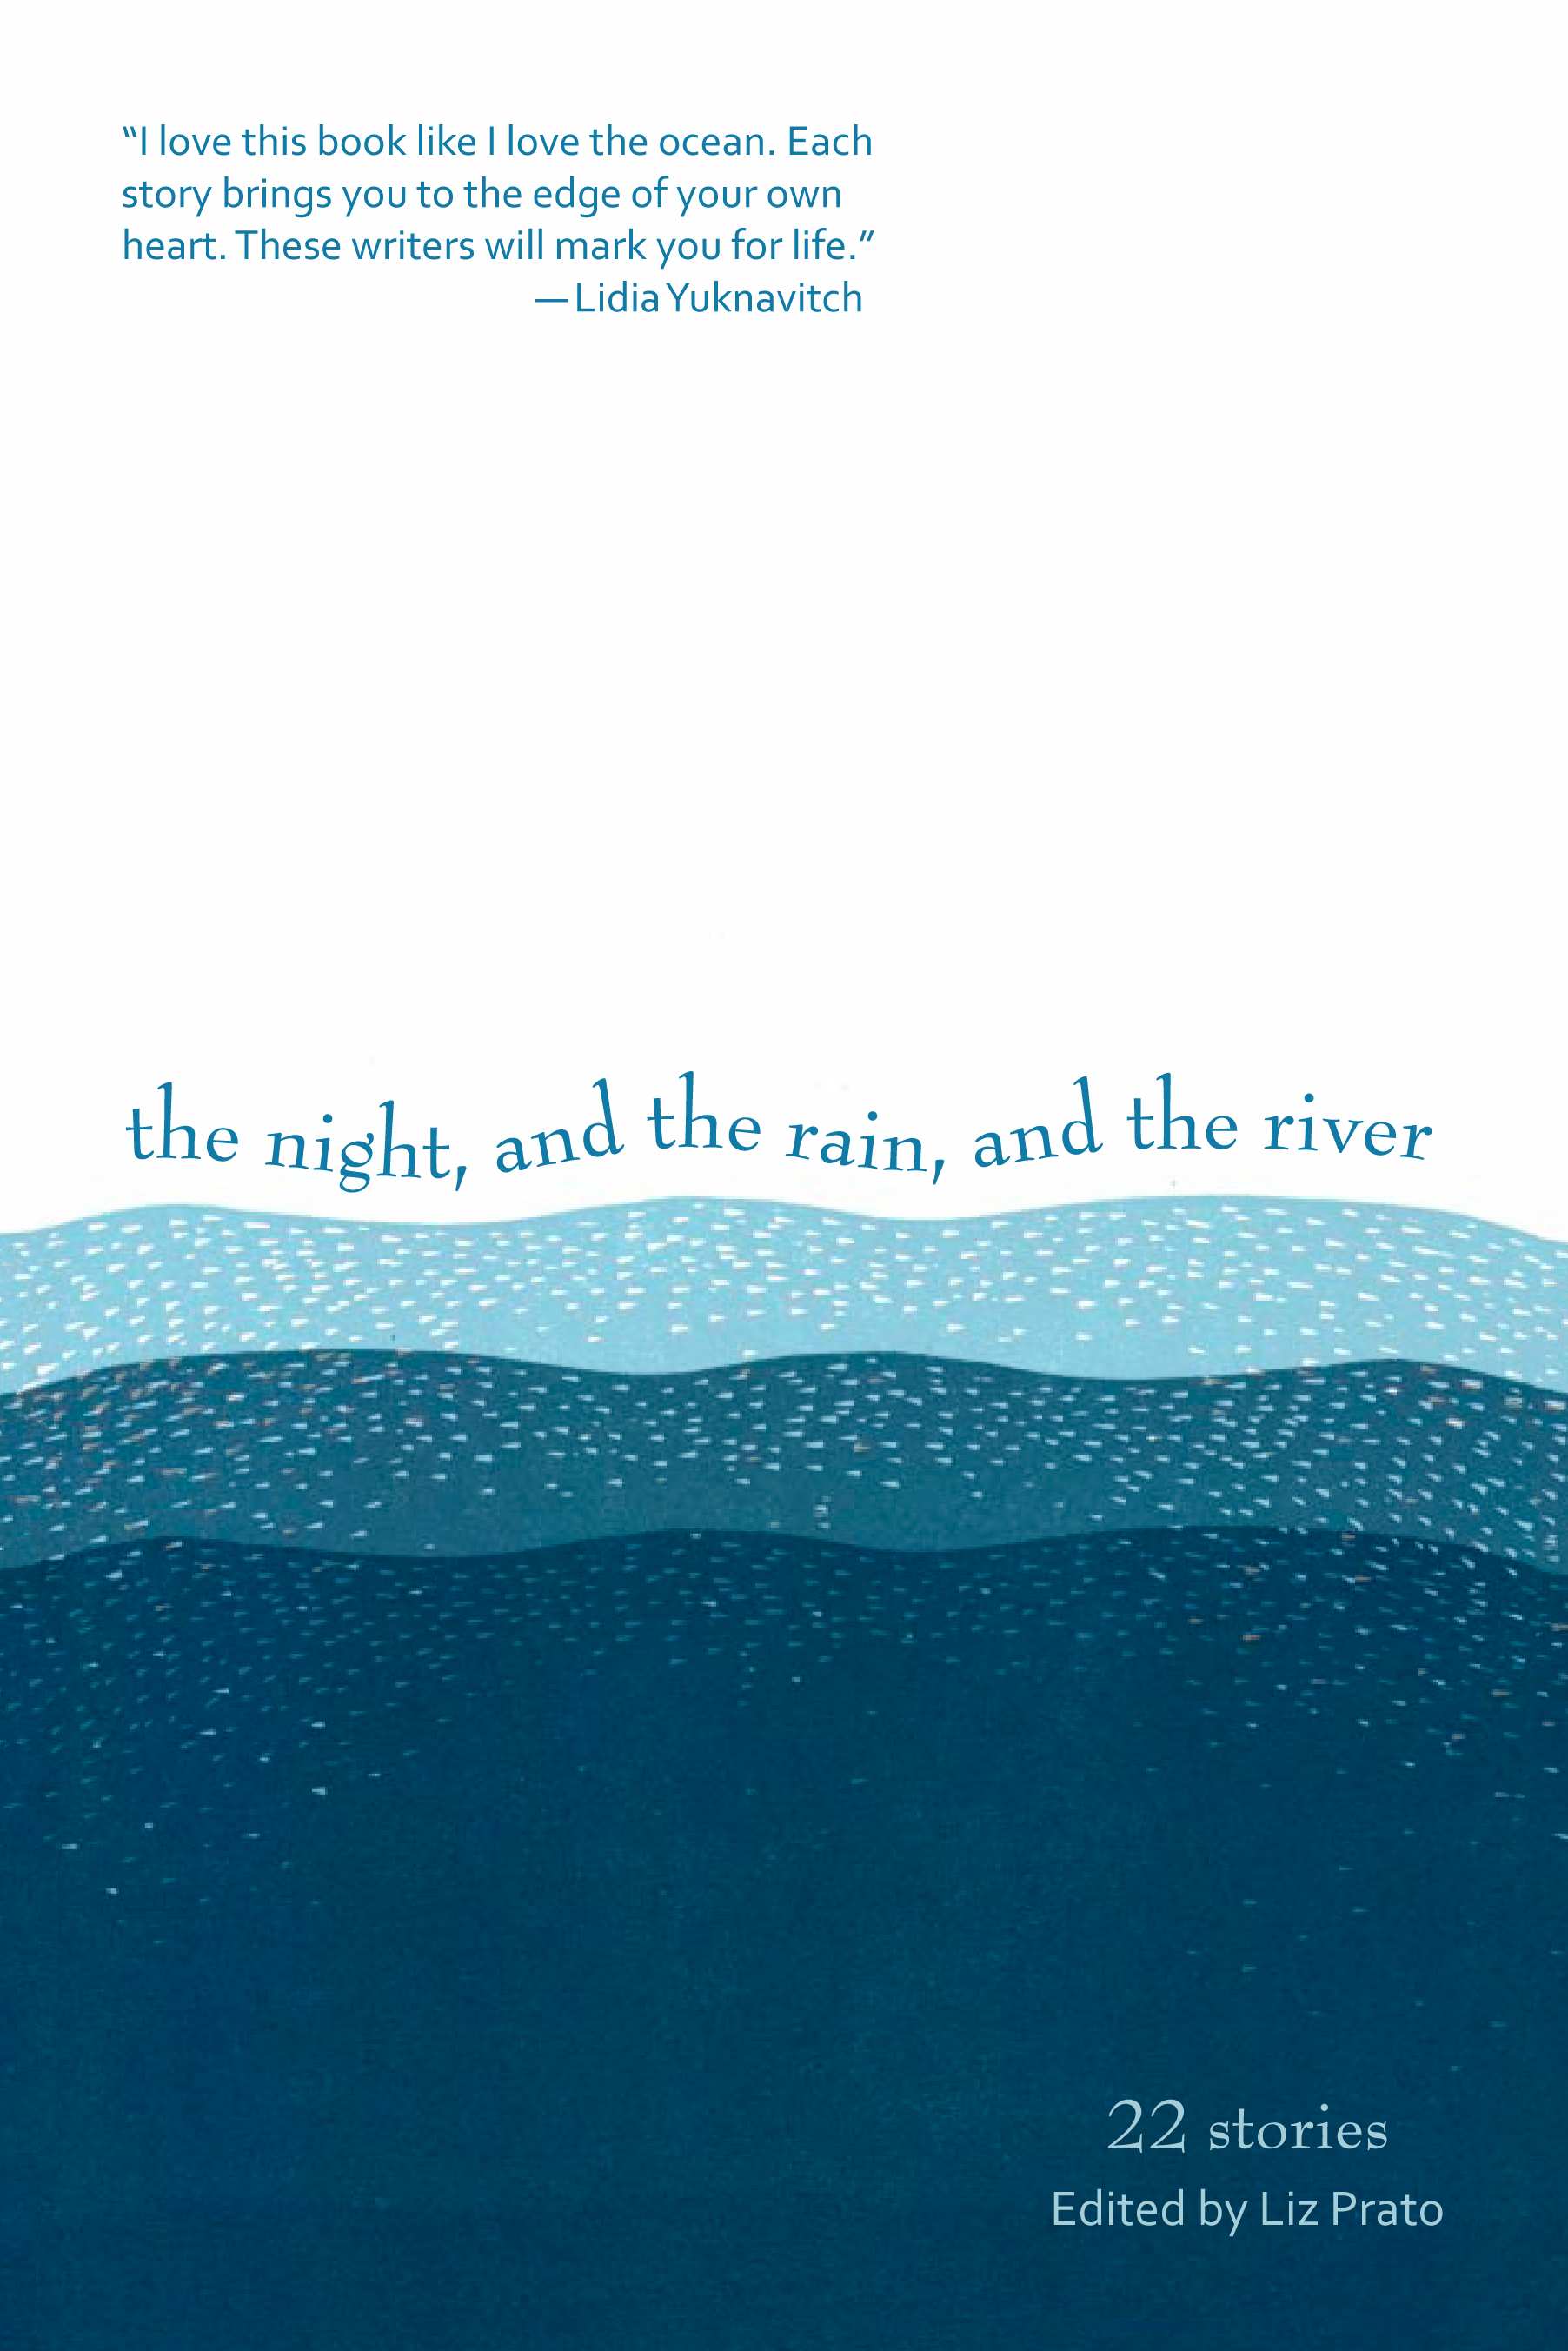 The Night, and the Rain, and the River